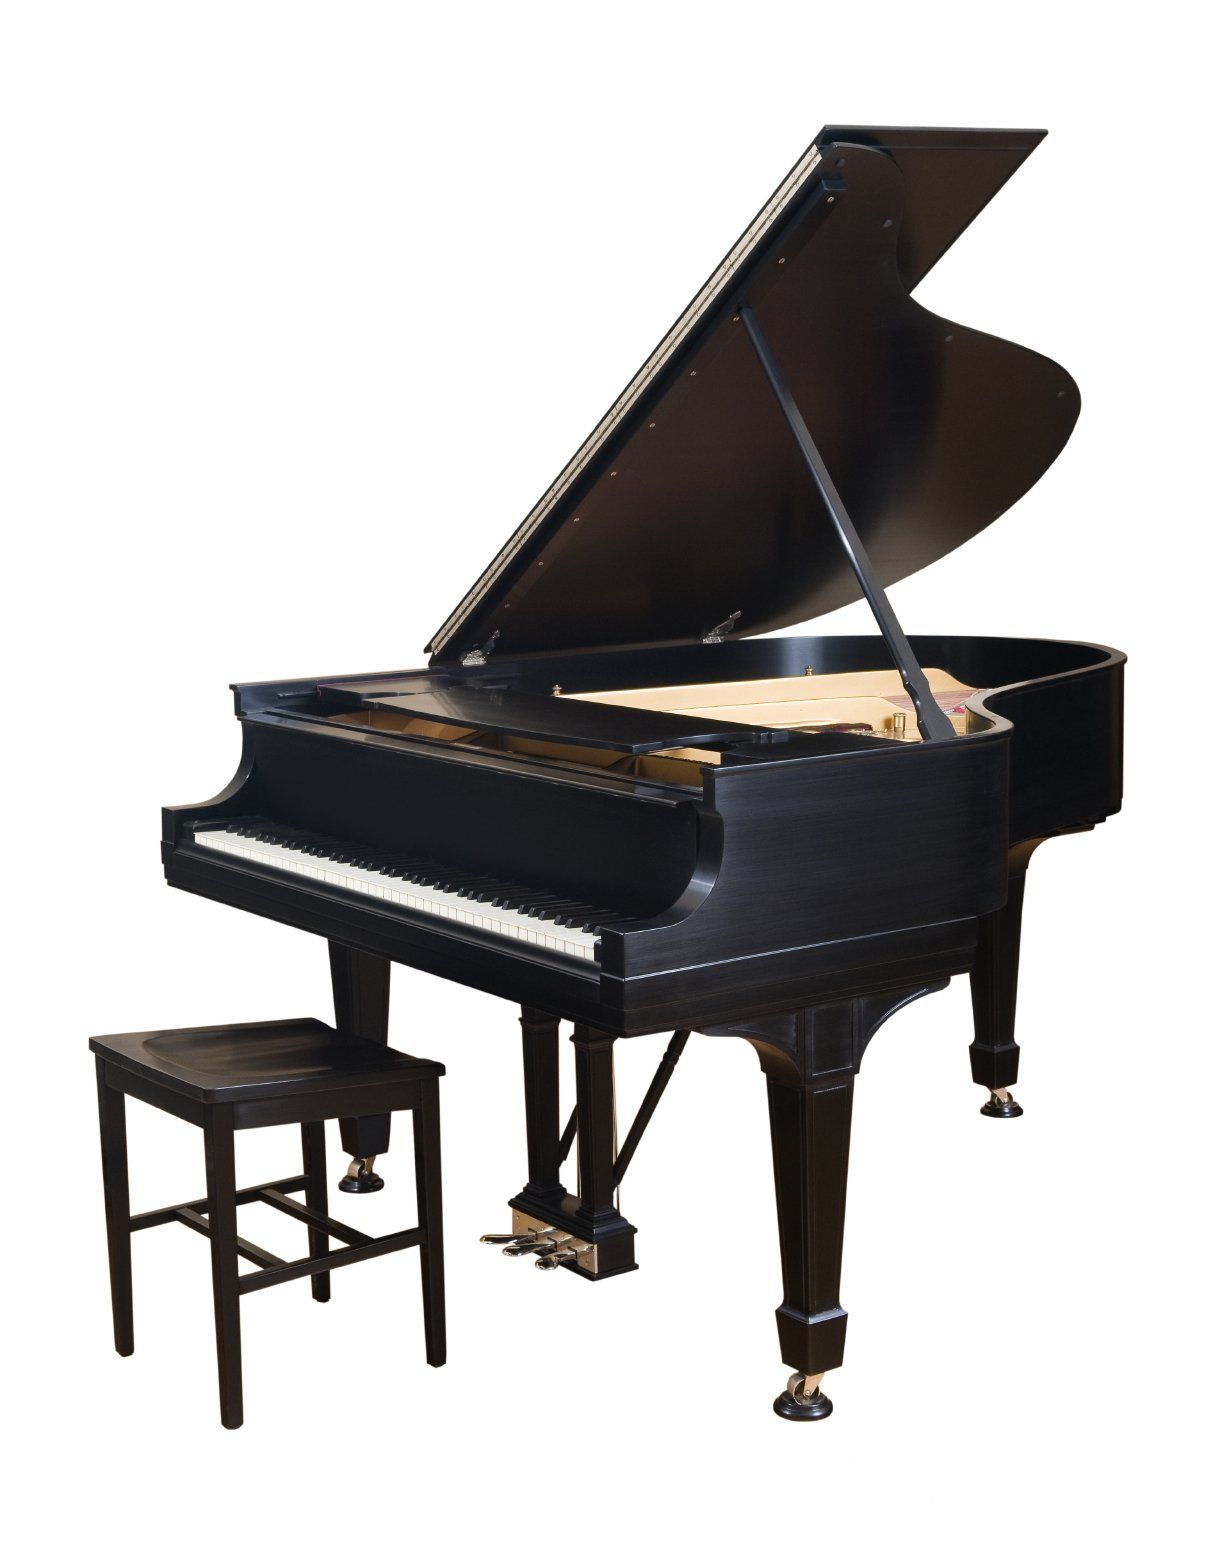 Open, black grand piano and stool